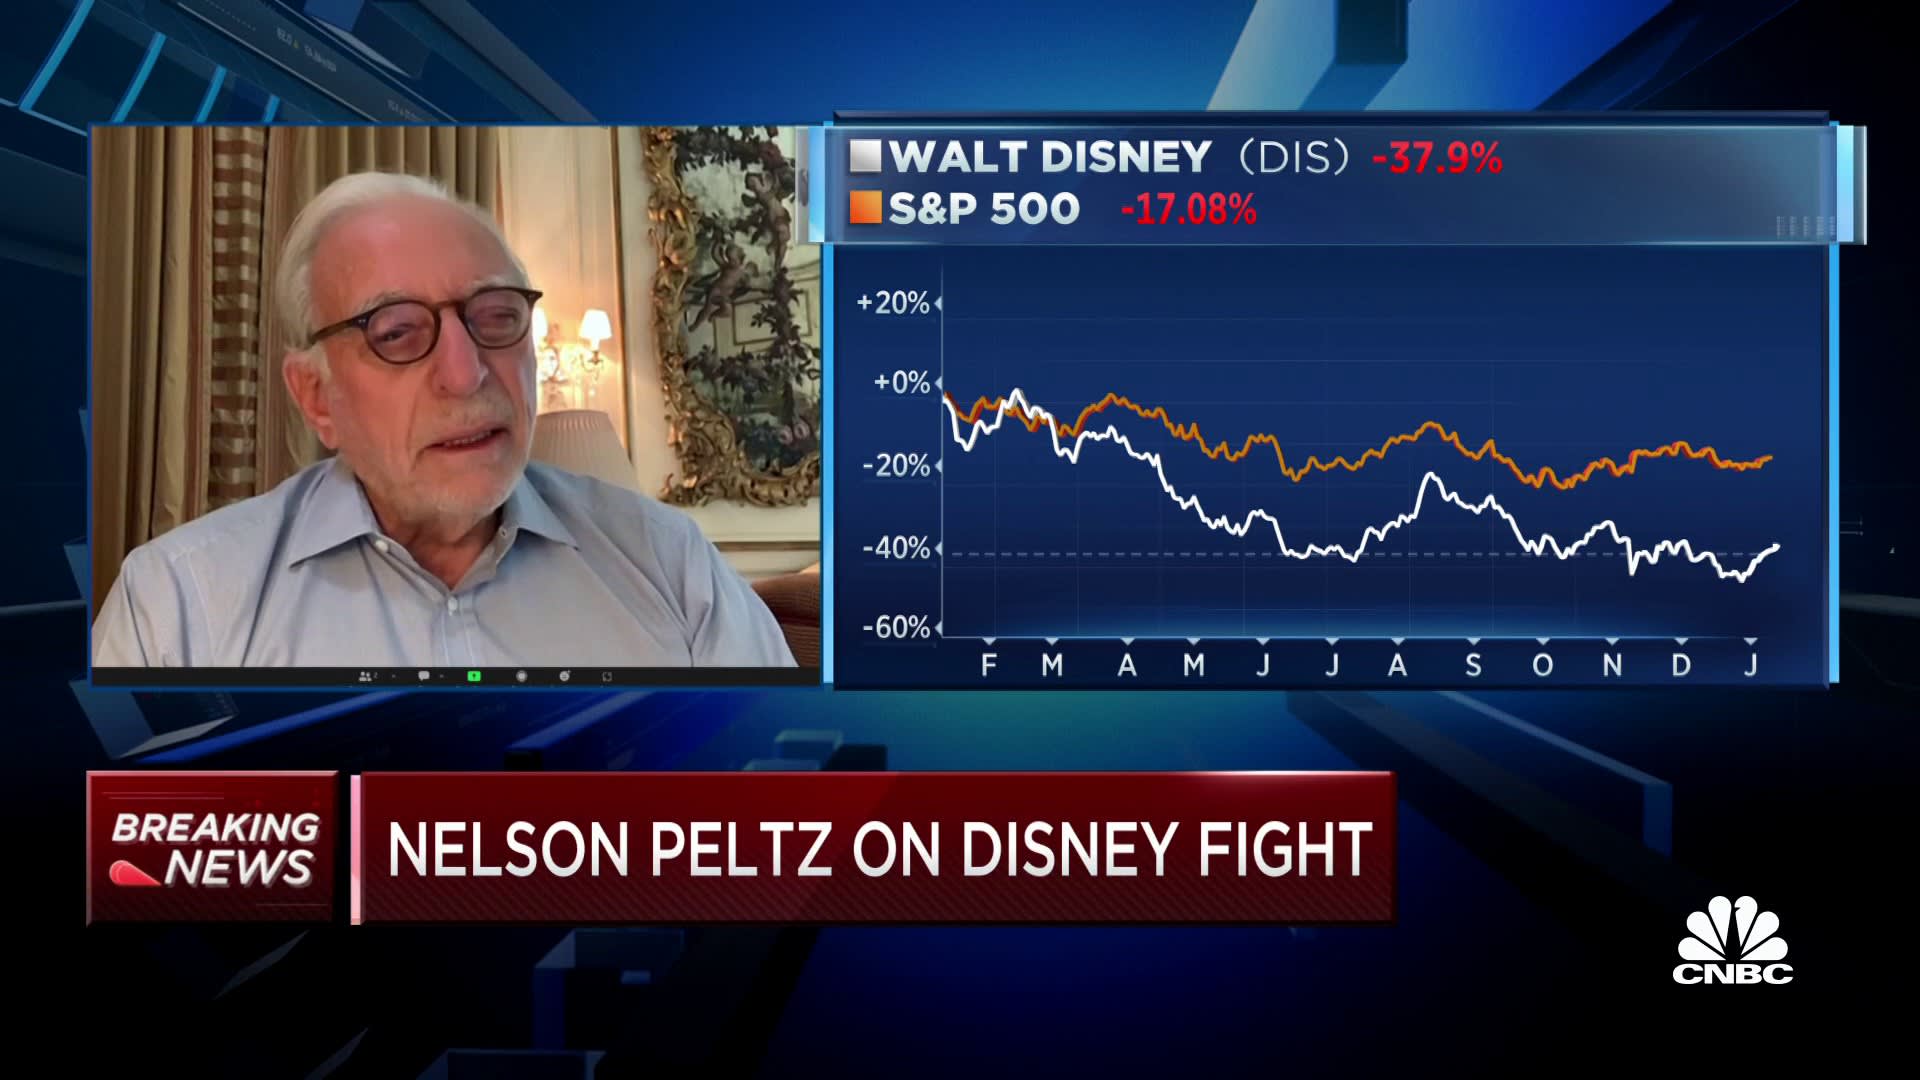 Nelson Peltz on Disney fight: They want my input on operations; they don't want me to have a vote